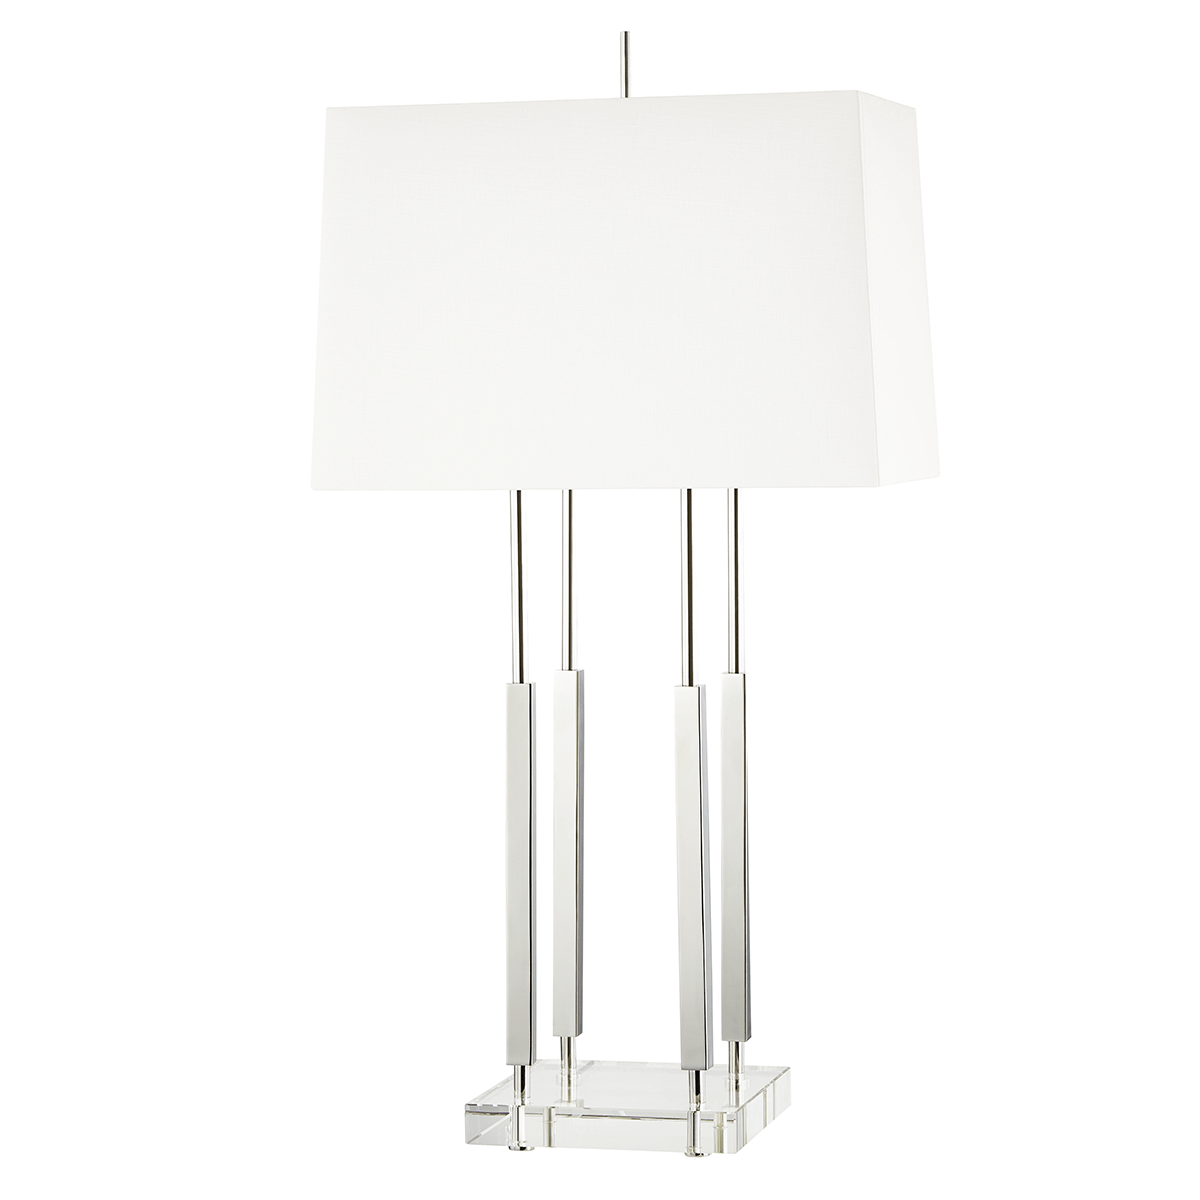 Heavenly Chandeliers Rhinebeck Table Lamp, aged Brass or polished Nickel